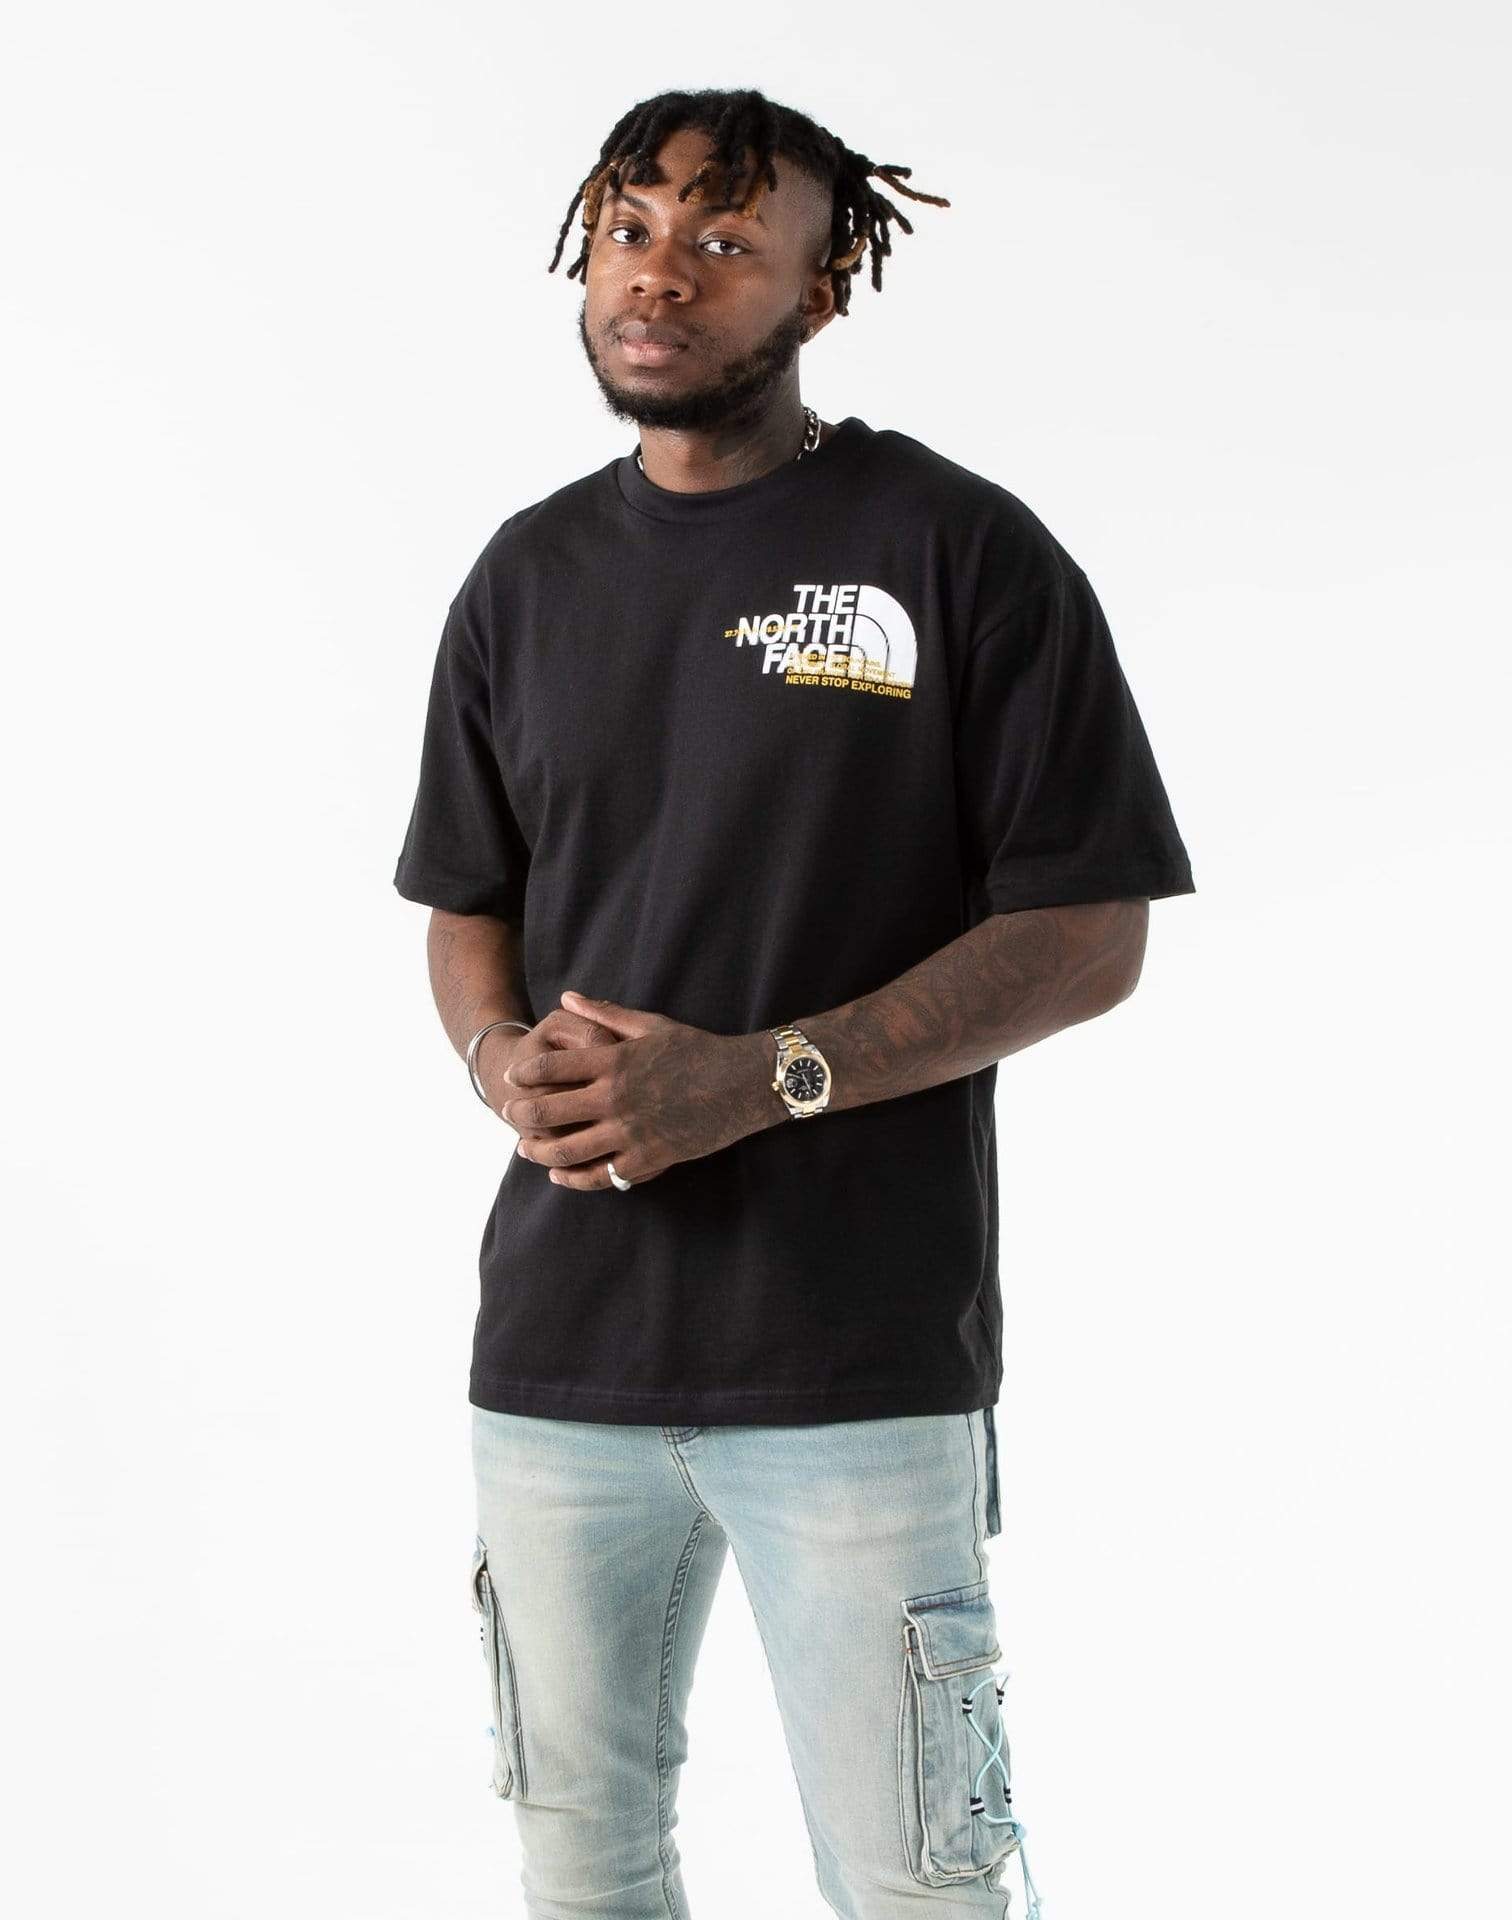 THE NORTH FACE COORDINATES SHORT SLEEVE TEE